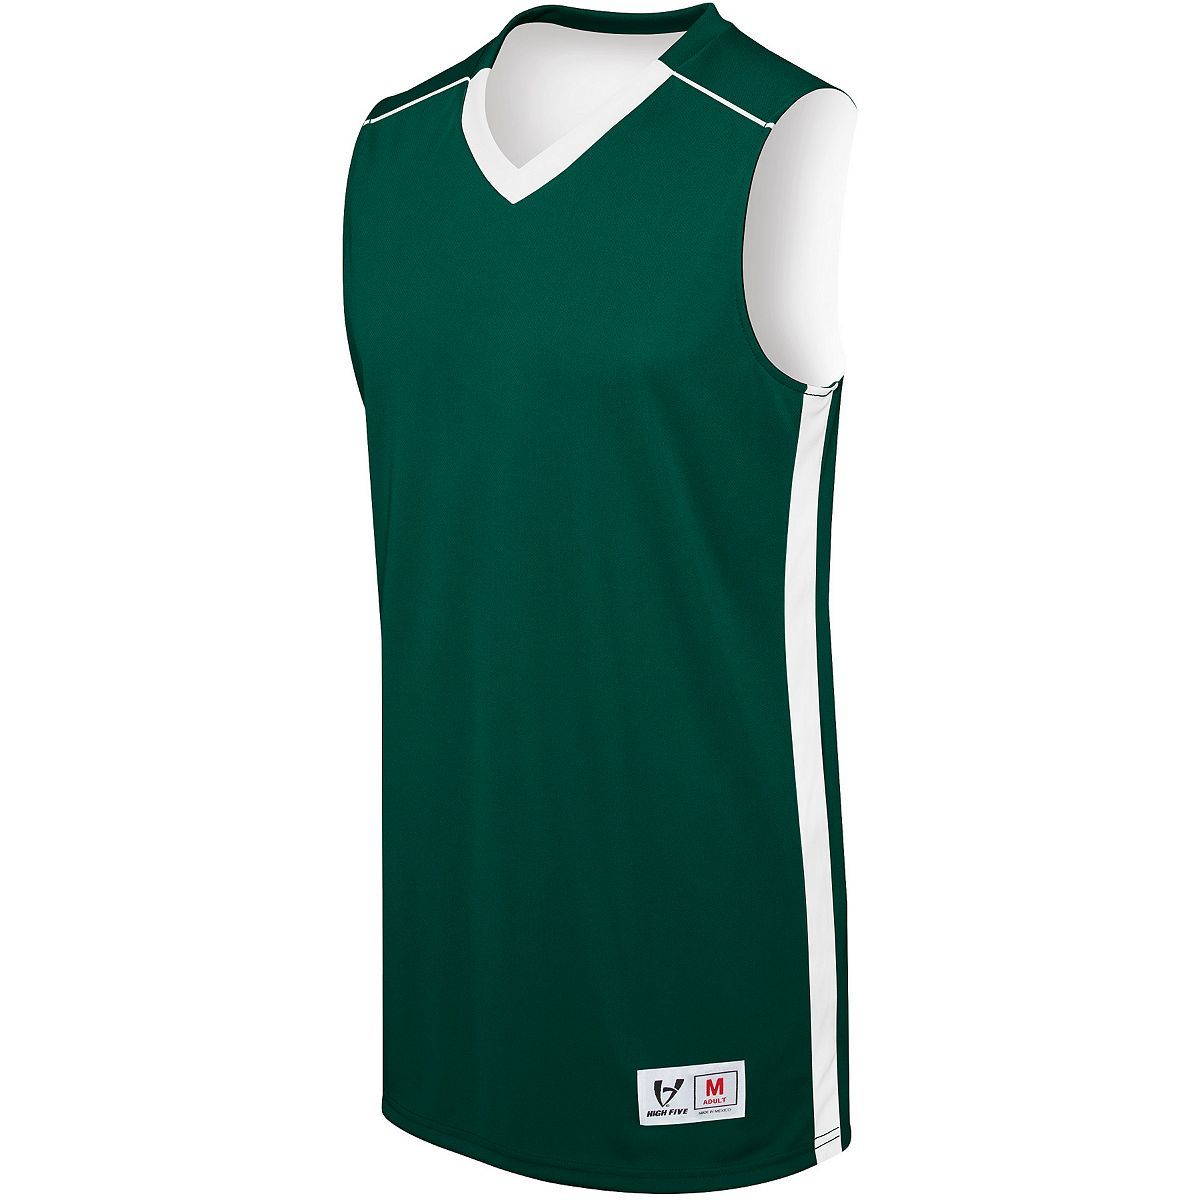 Augusta Sportswear Ladies Competition Reversible Jersey in Forest/White  -Part of the Ladies, Ladies-Jersey, Augusta-Products, Basketball, Shirts, All-Sports, All-Sports-1 product lines at KanaleyCreations.com